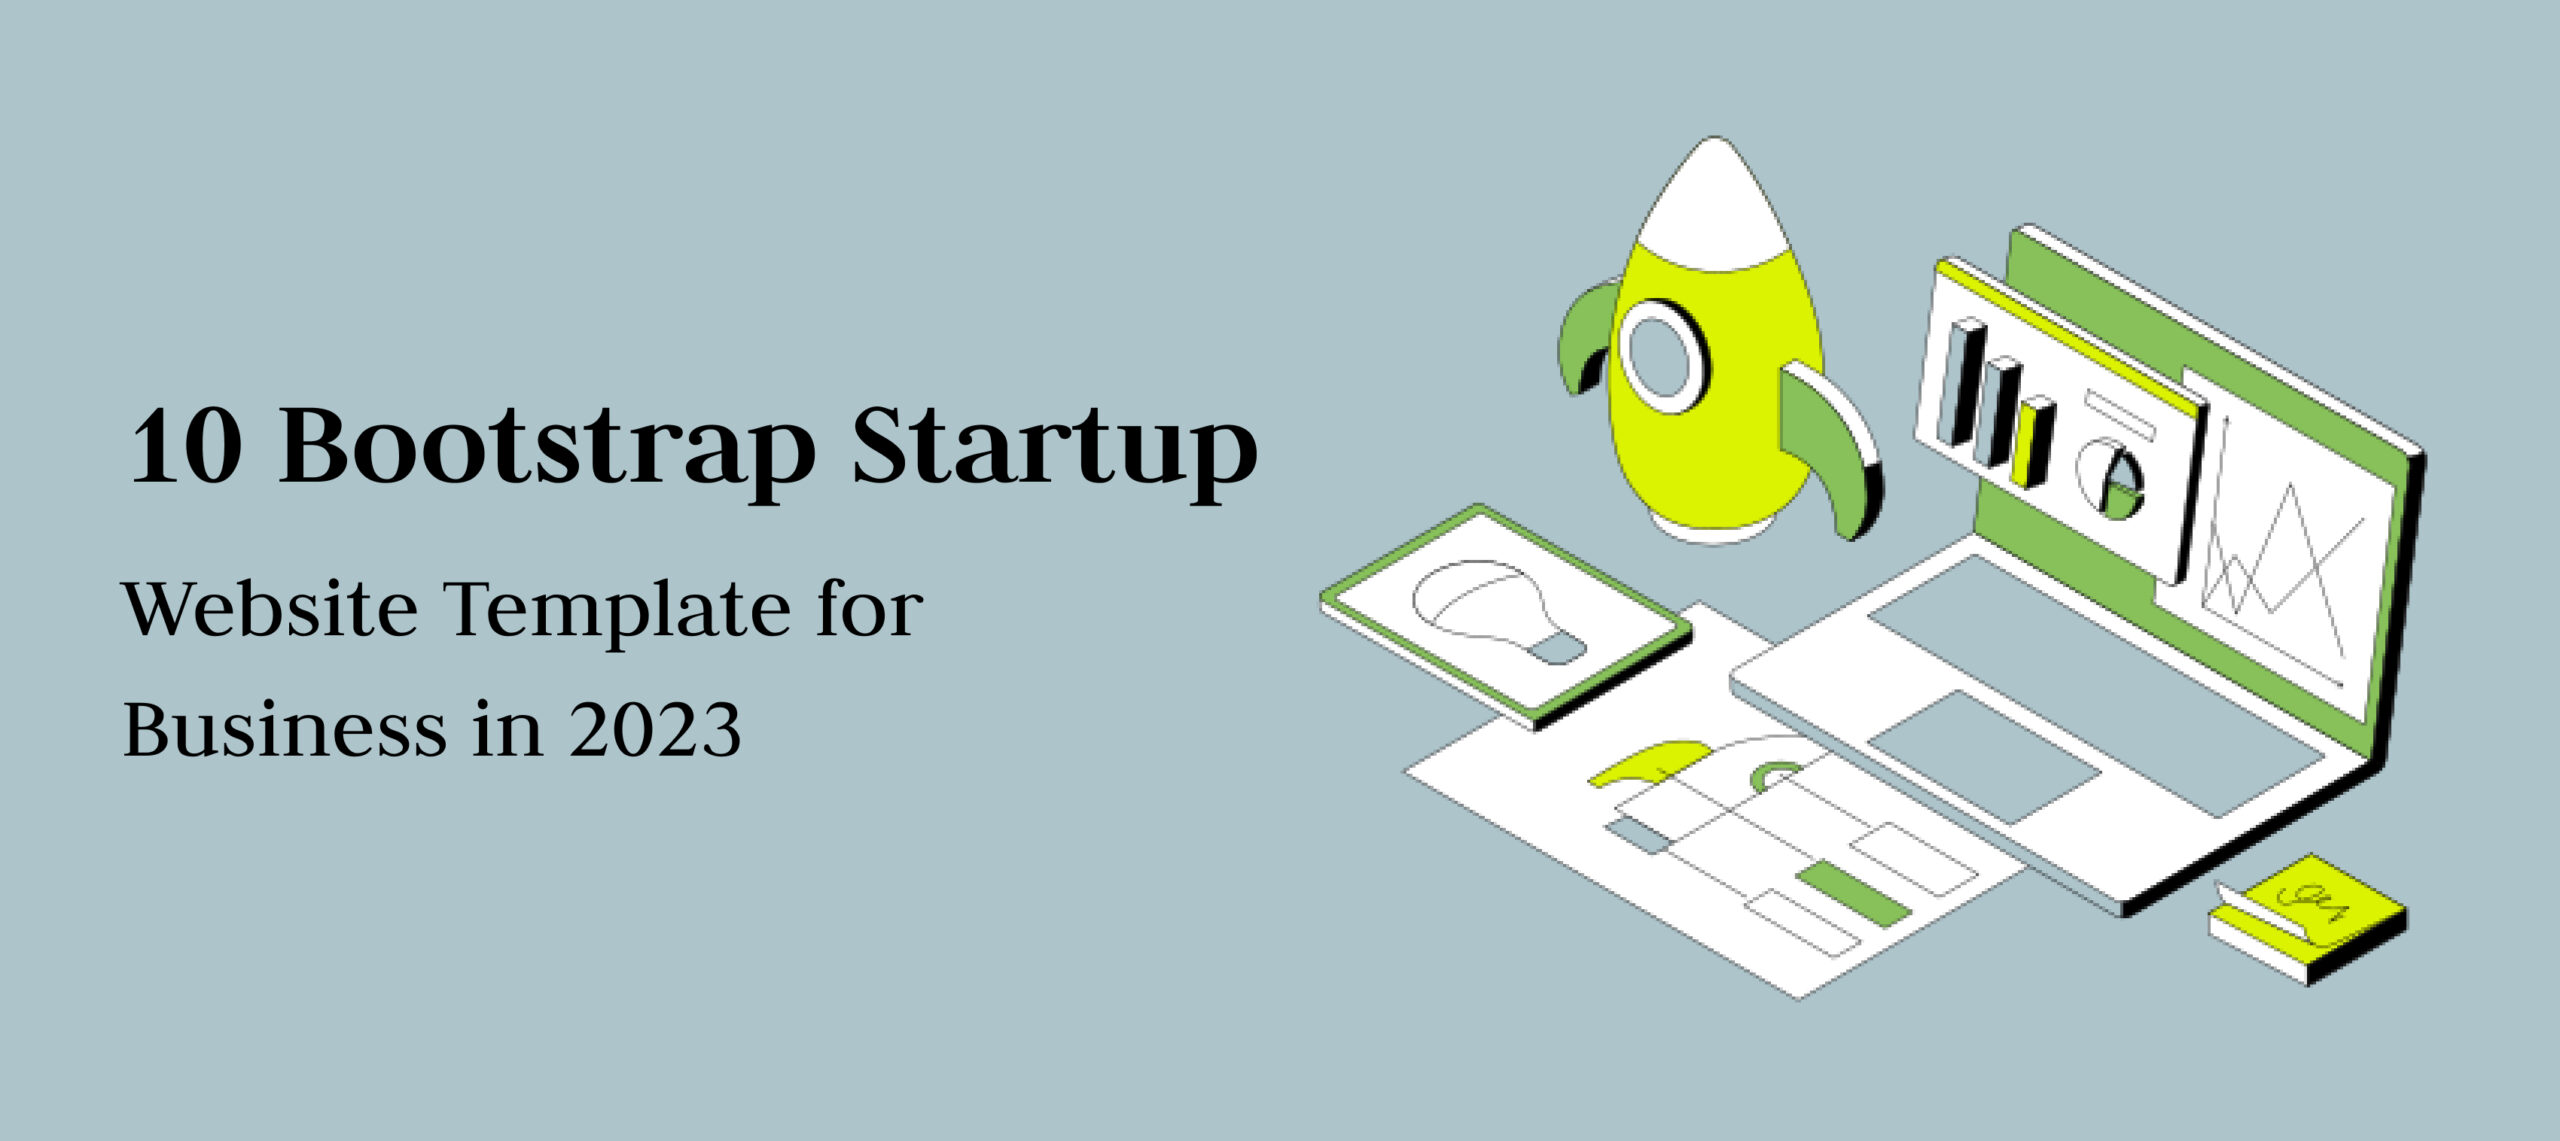  10 Bootstrap Startup Website Template for Business in 2023